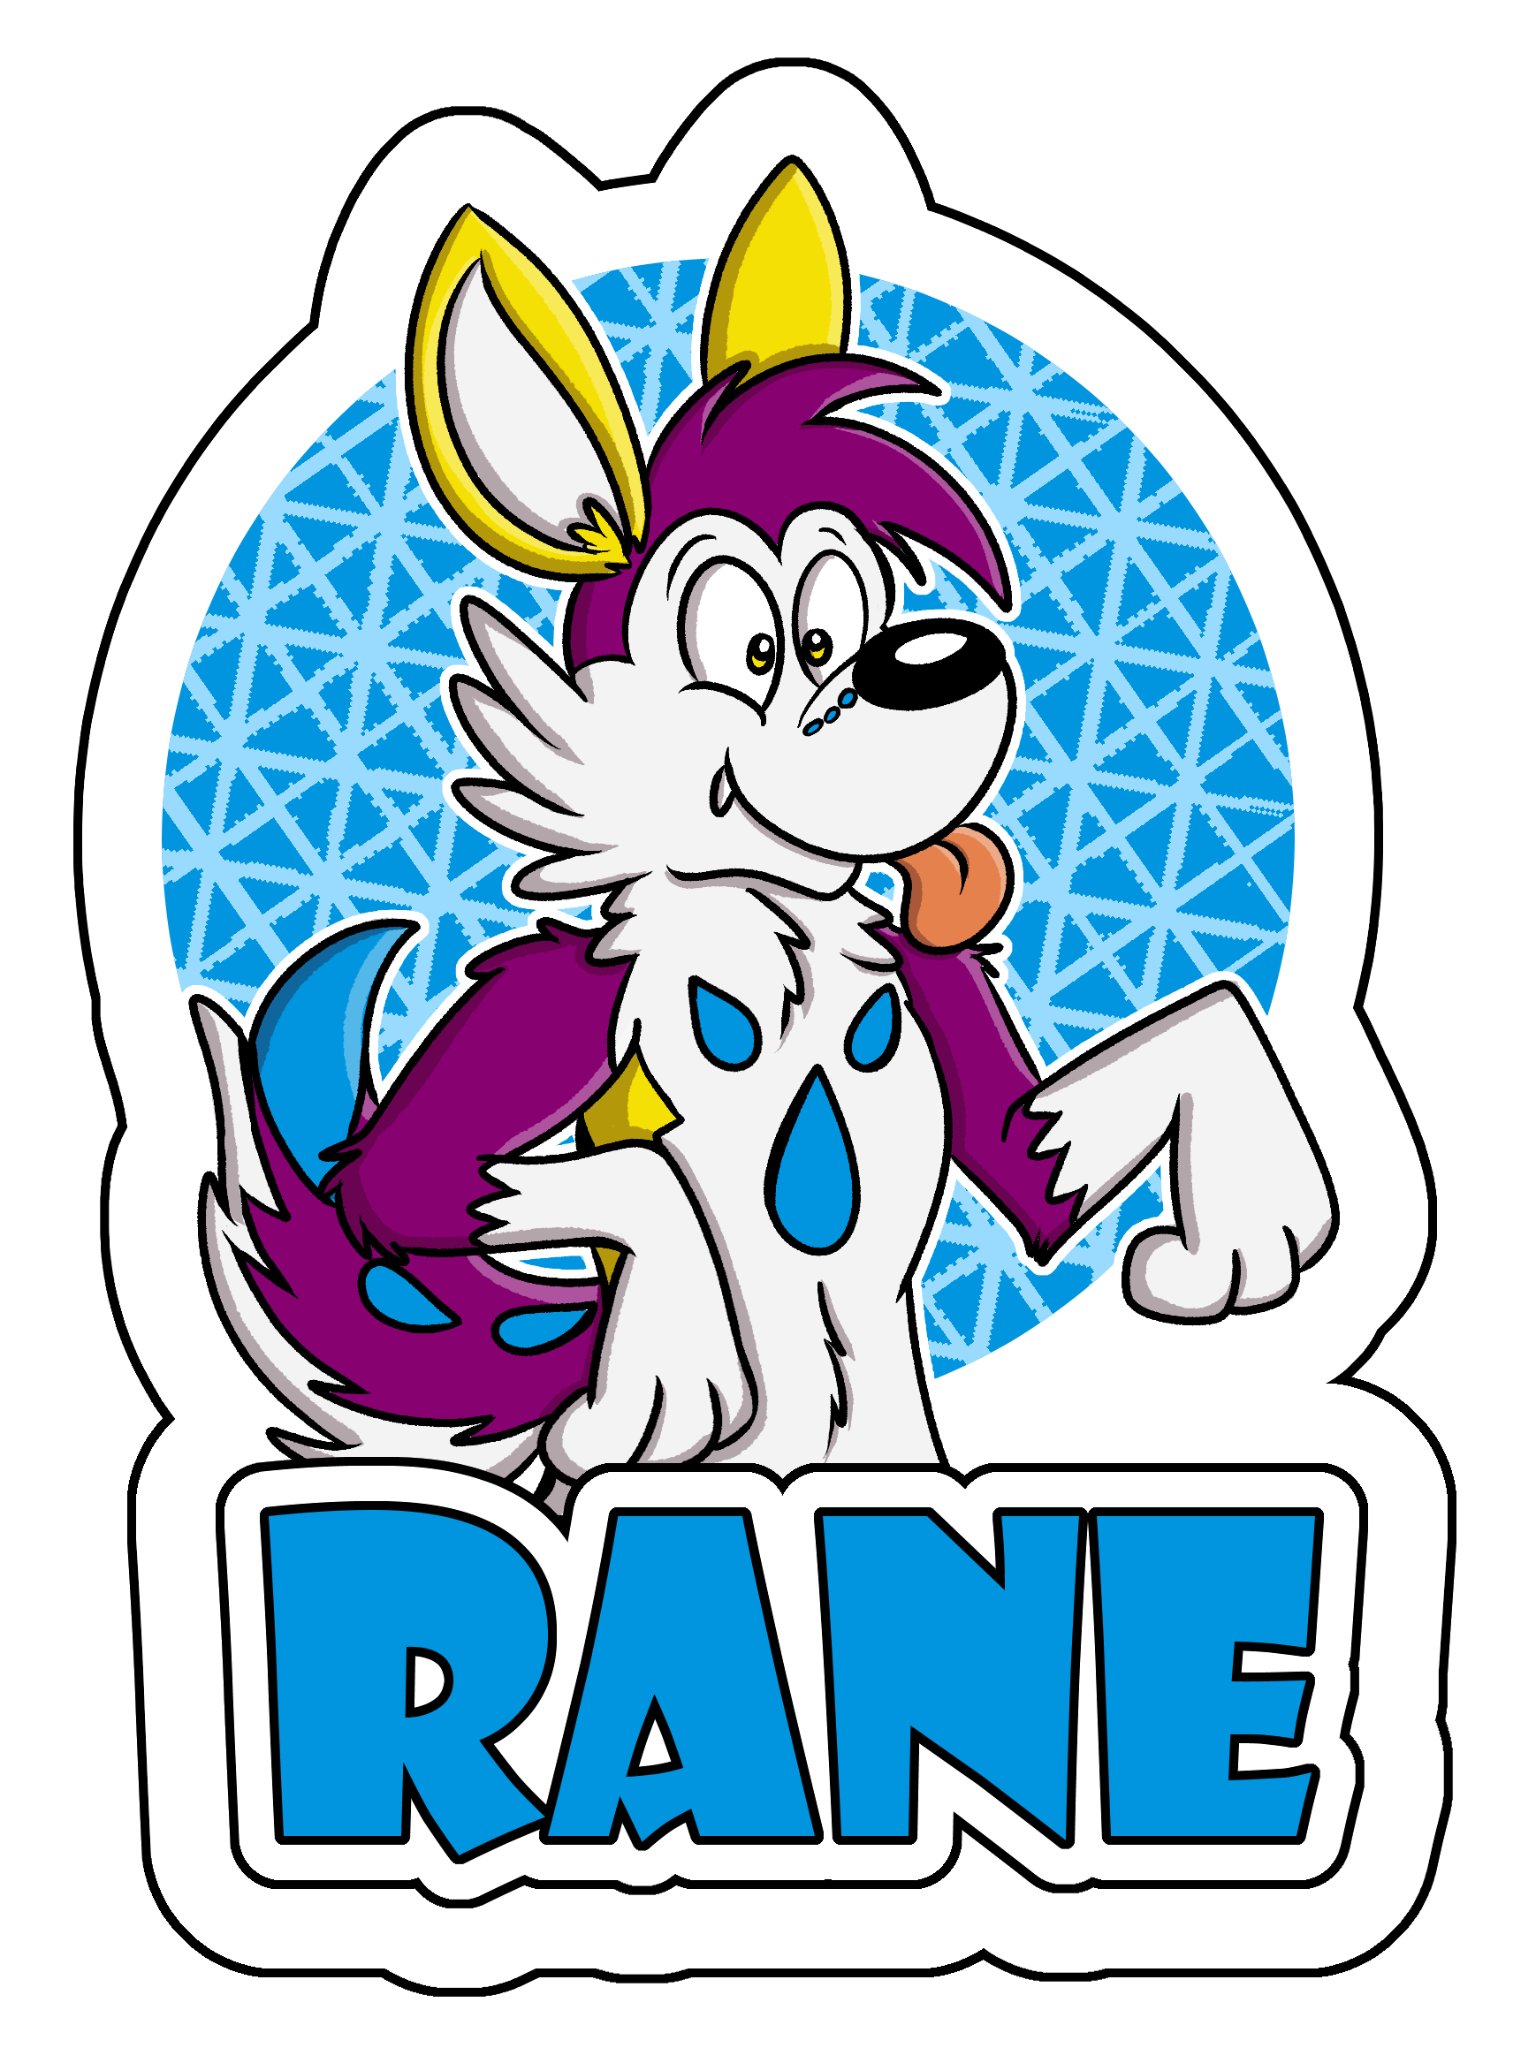 RaneBadge-by-SketchyMouse